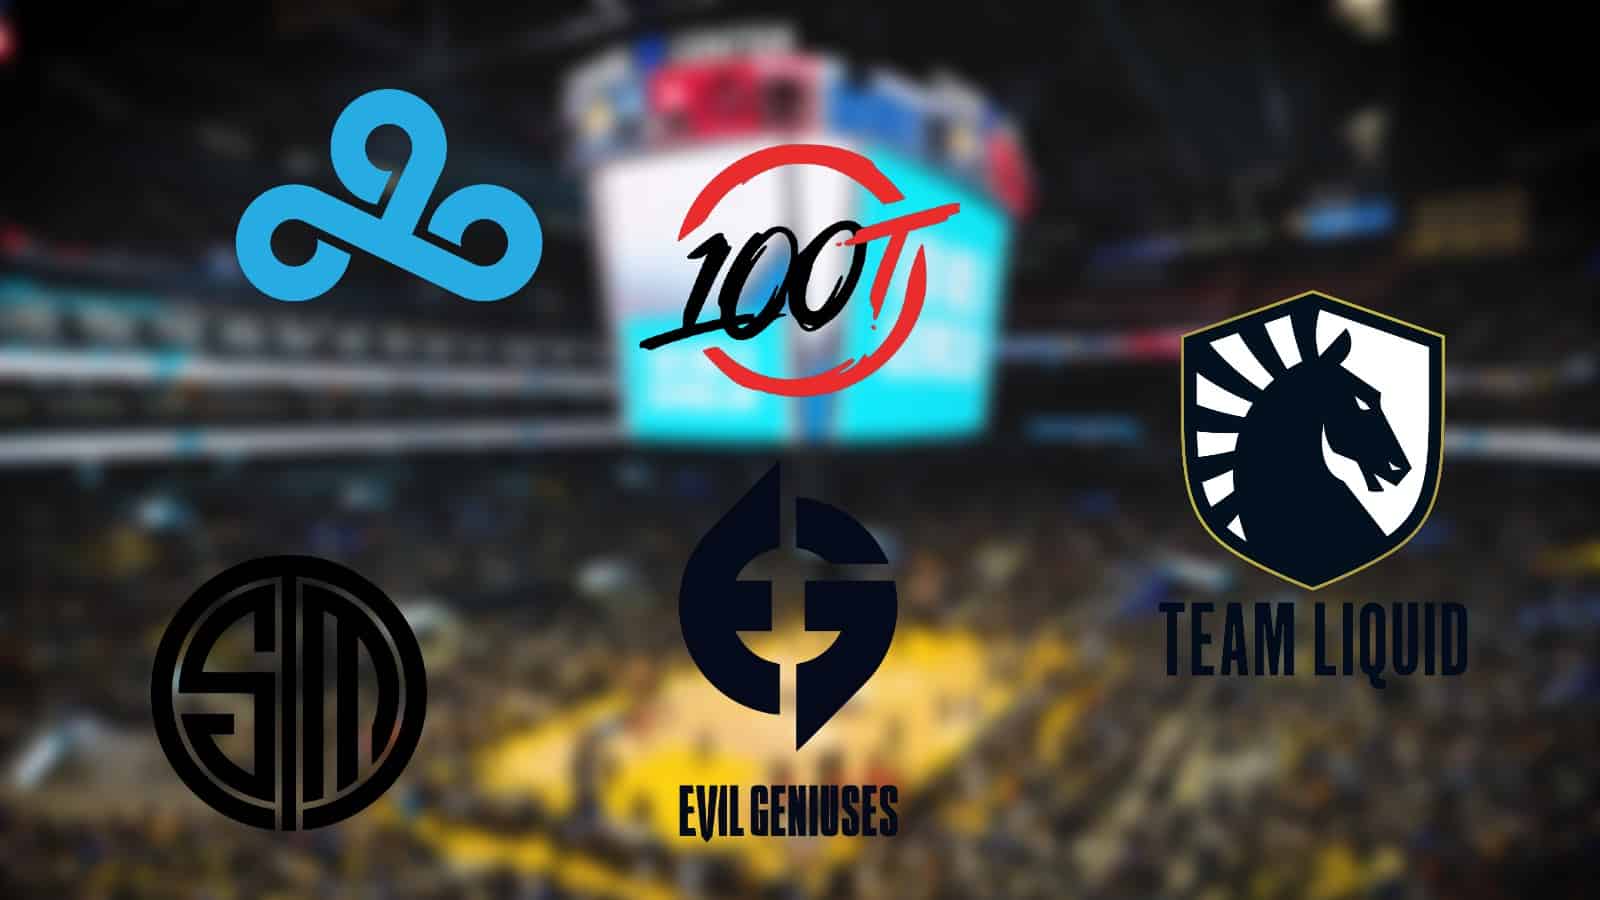 LCS team logos over image of the Chase Centre